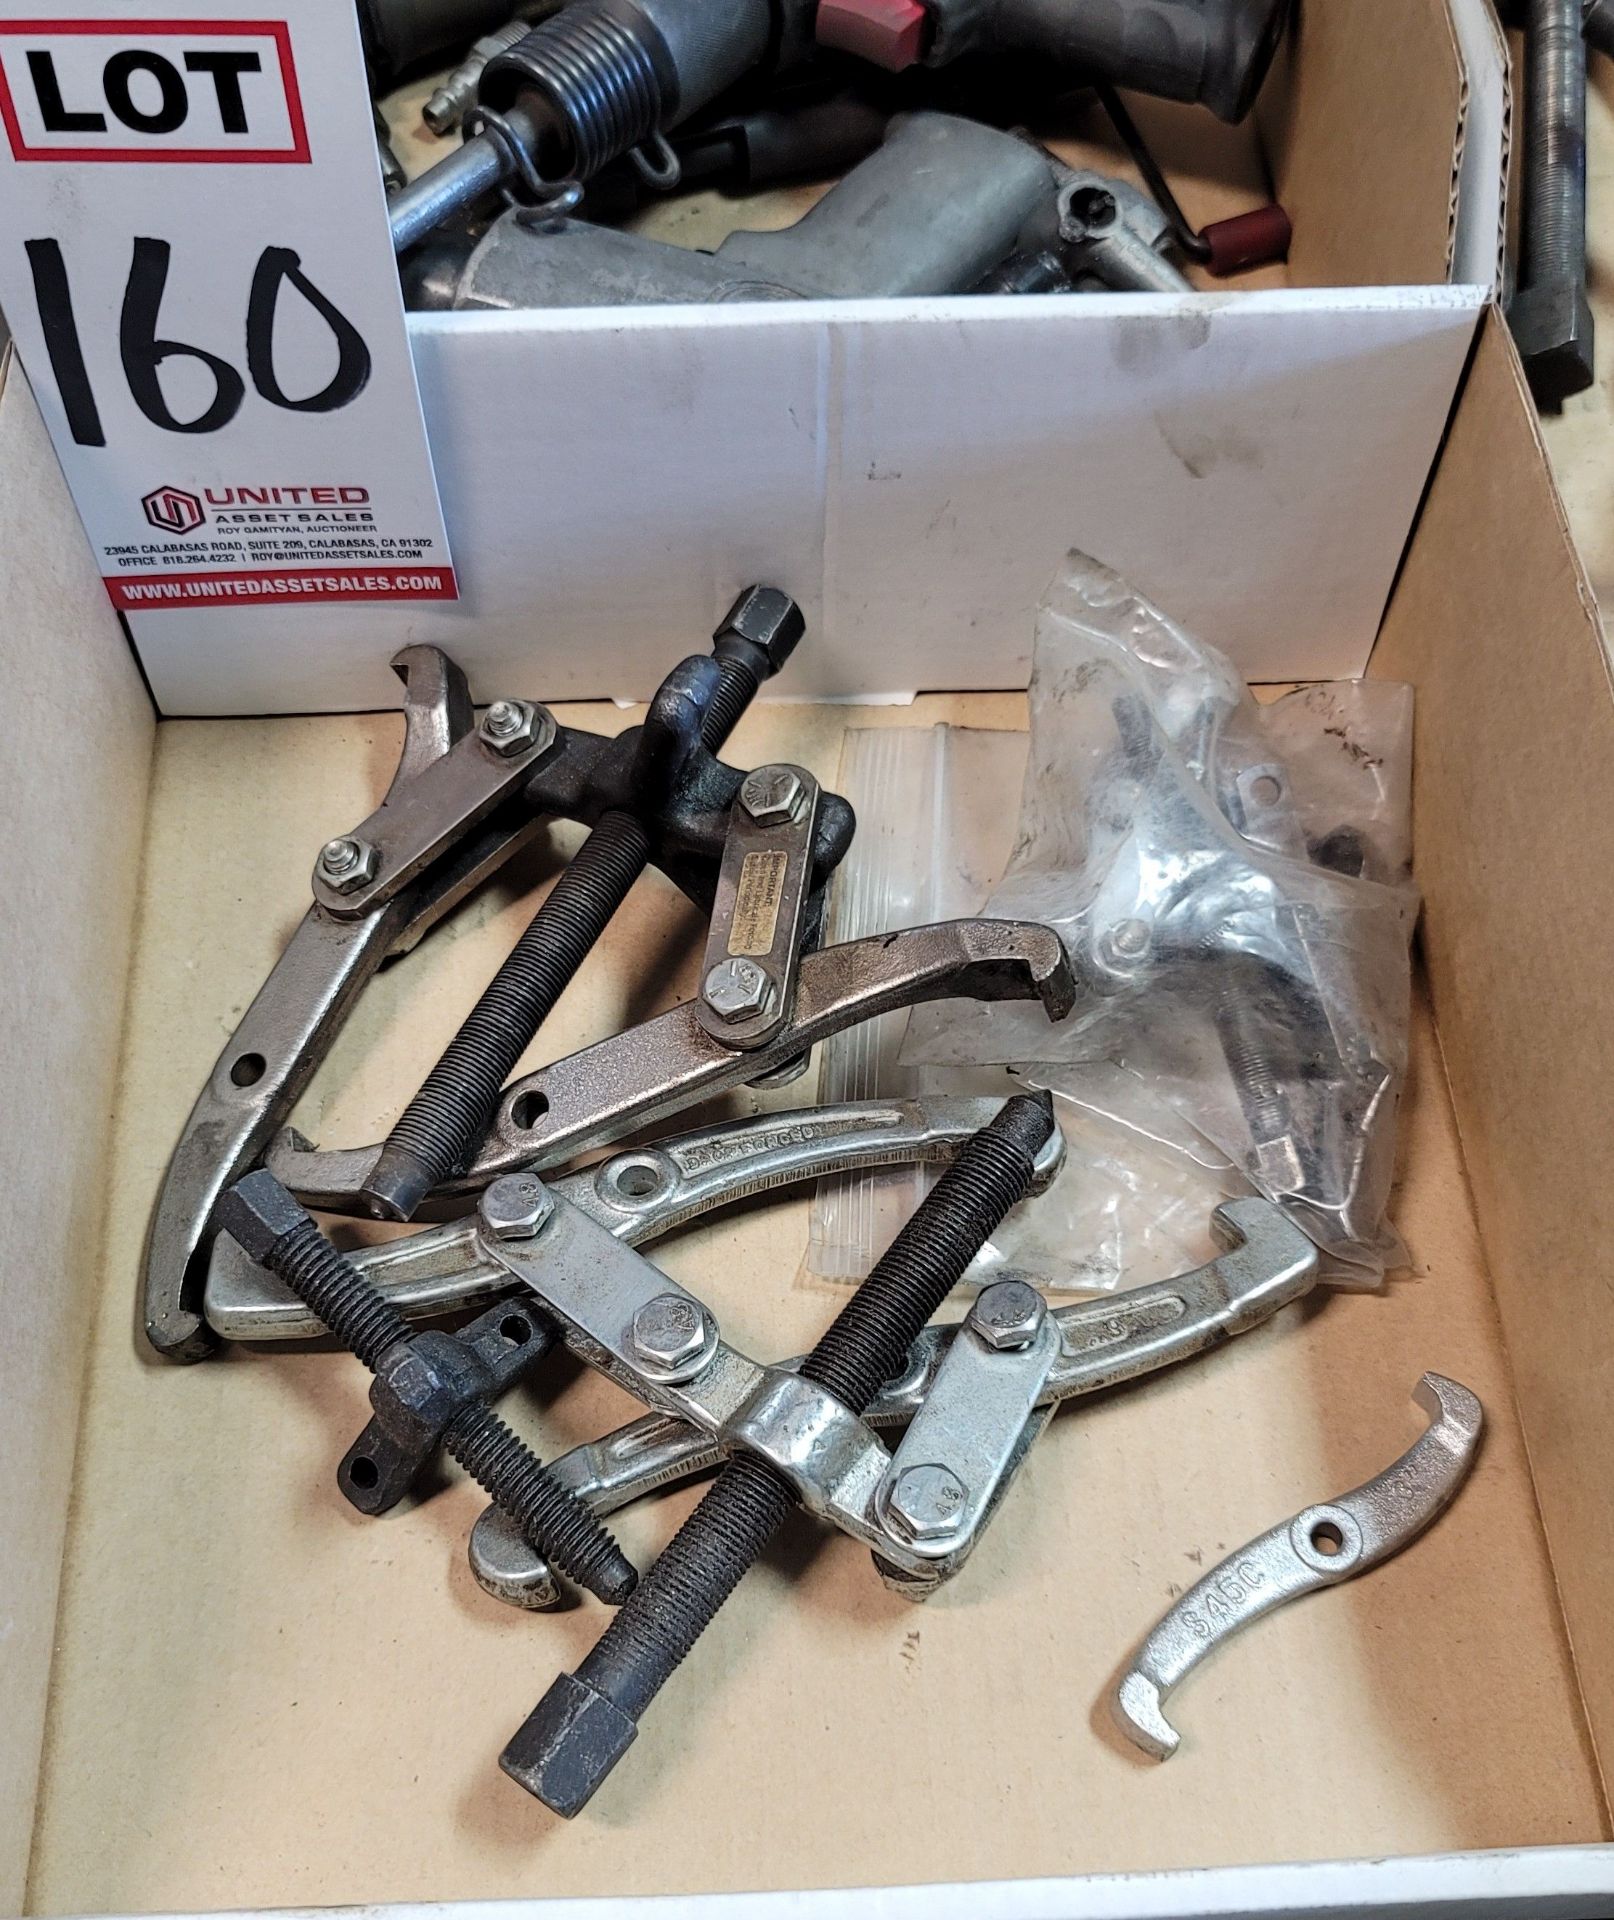 LOT - PULLERS, (LOCATION: 2174 W 2300 S)